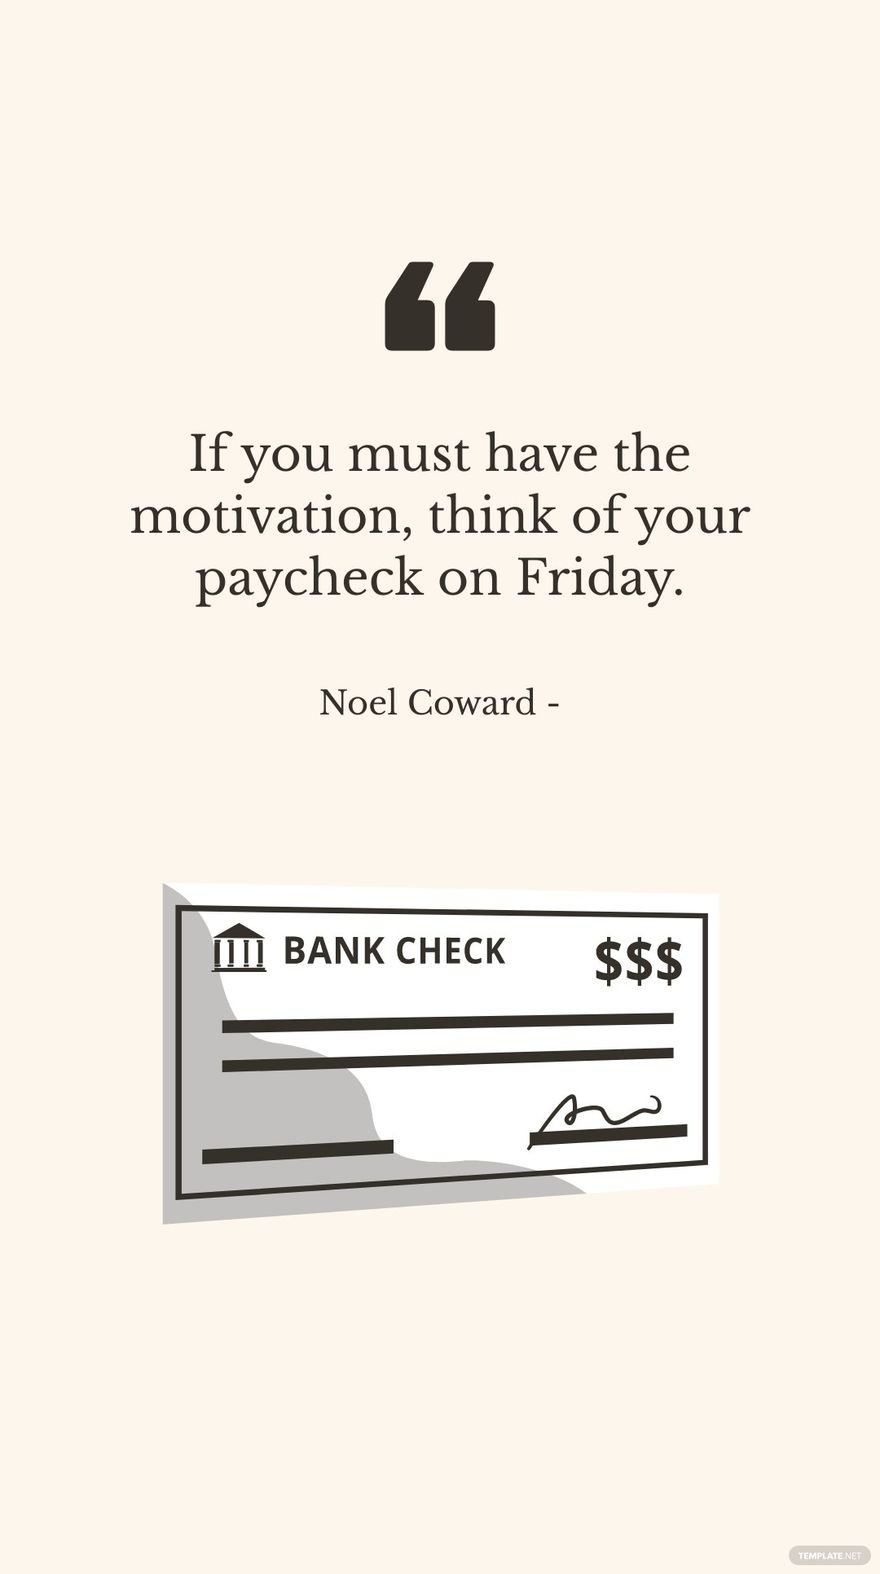 Free Noel Coward - If you must have the motivation, think of your paycheck on Friday. in JPG